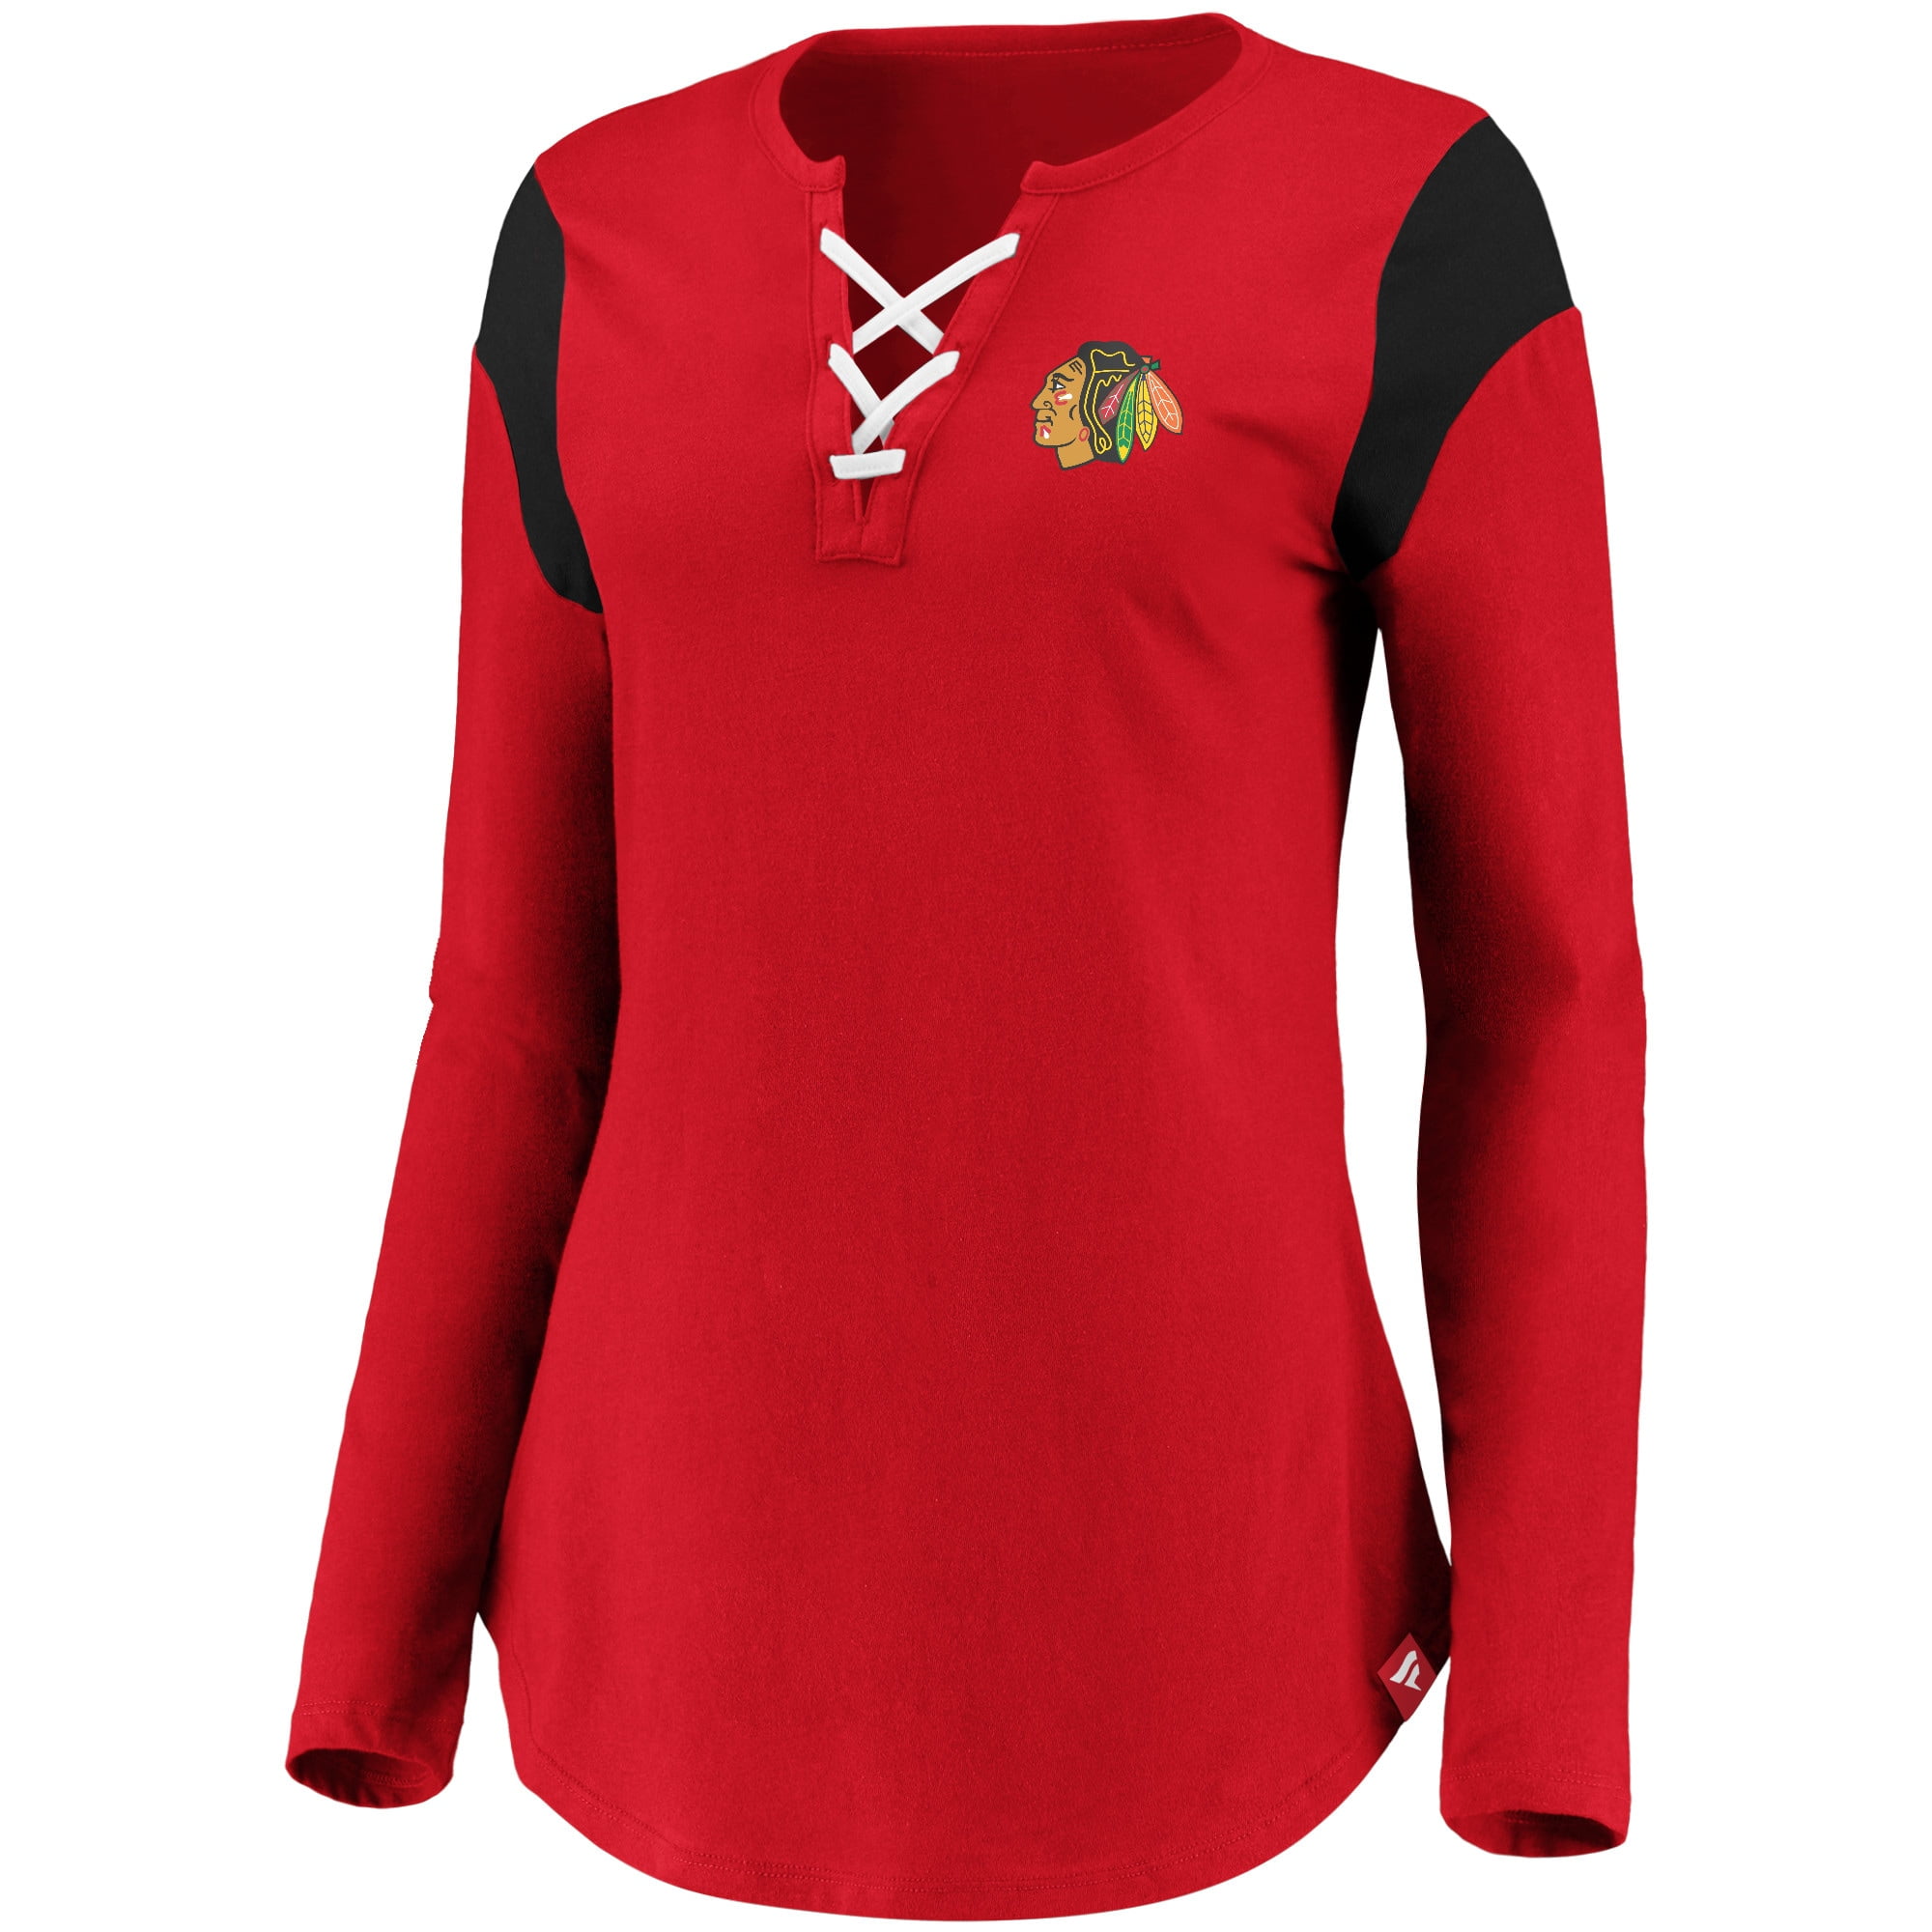 New Women's Welsh Cymru Classic Rugby Contrast V Collar Cotton Polo T-shirt Top